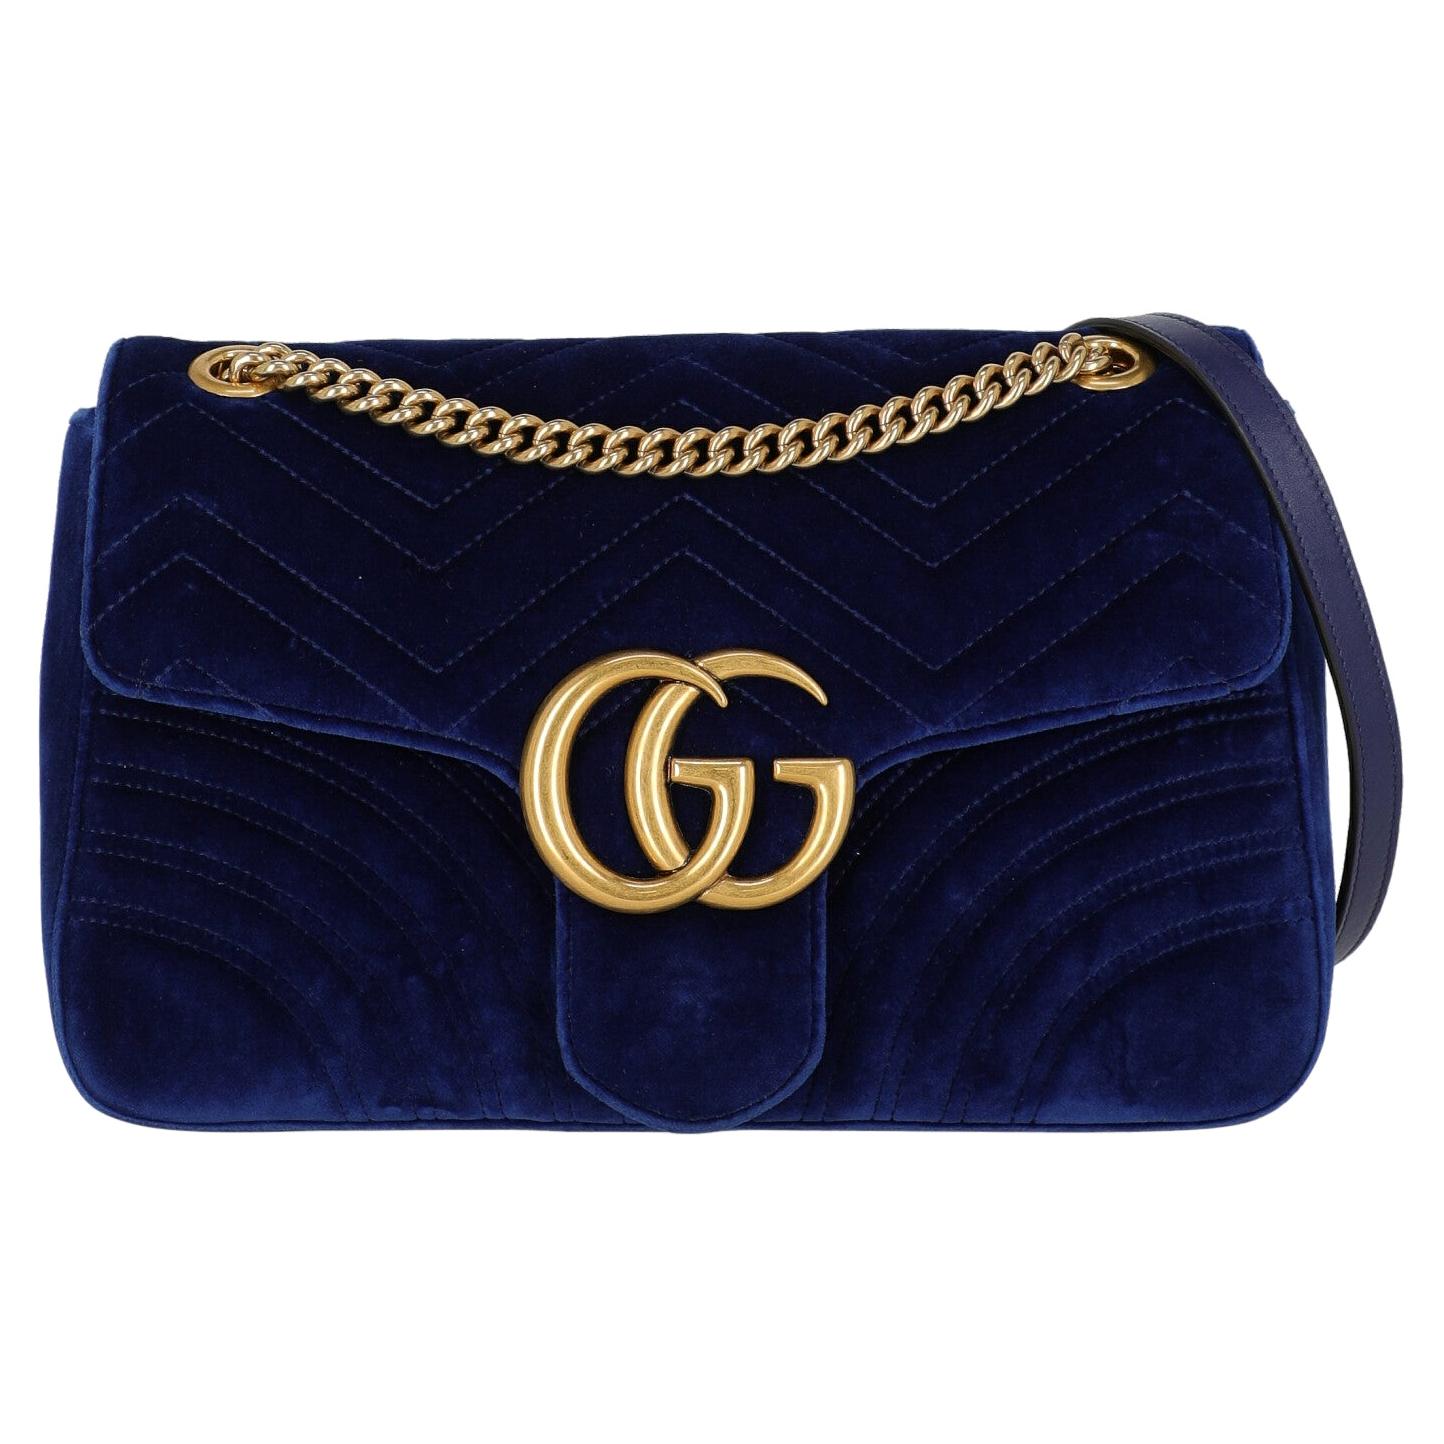 Gucci  Women   Shoulder bags  Marmont Navy Fabric 